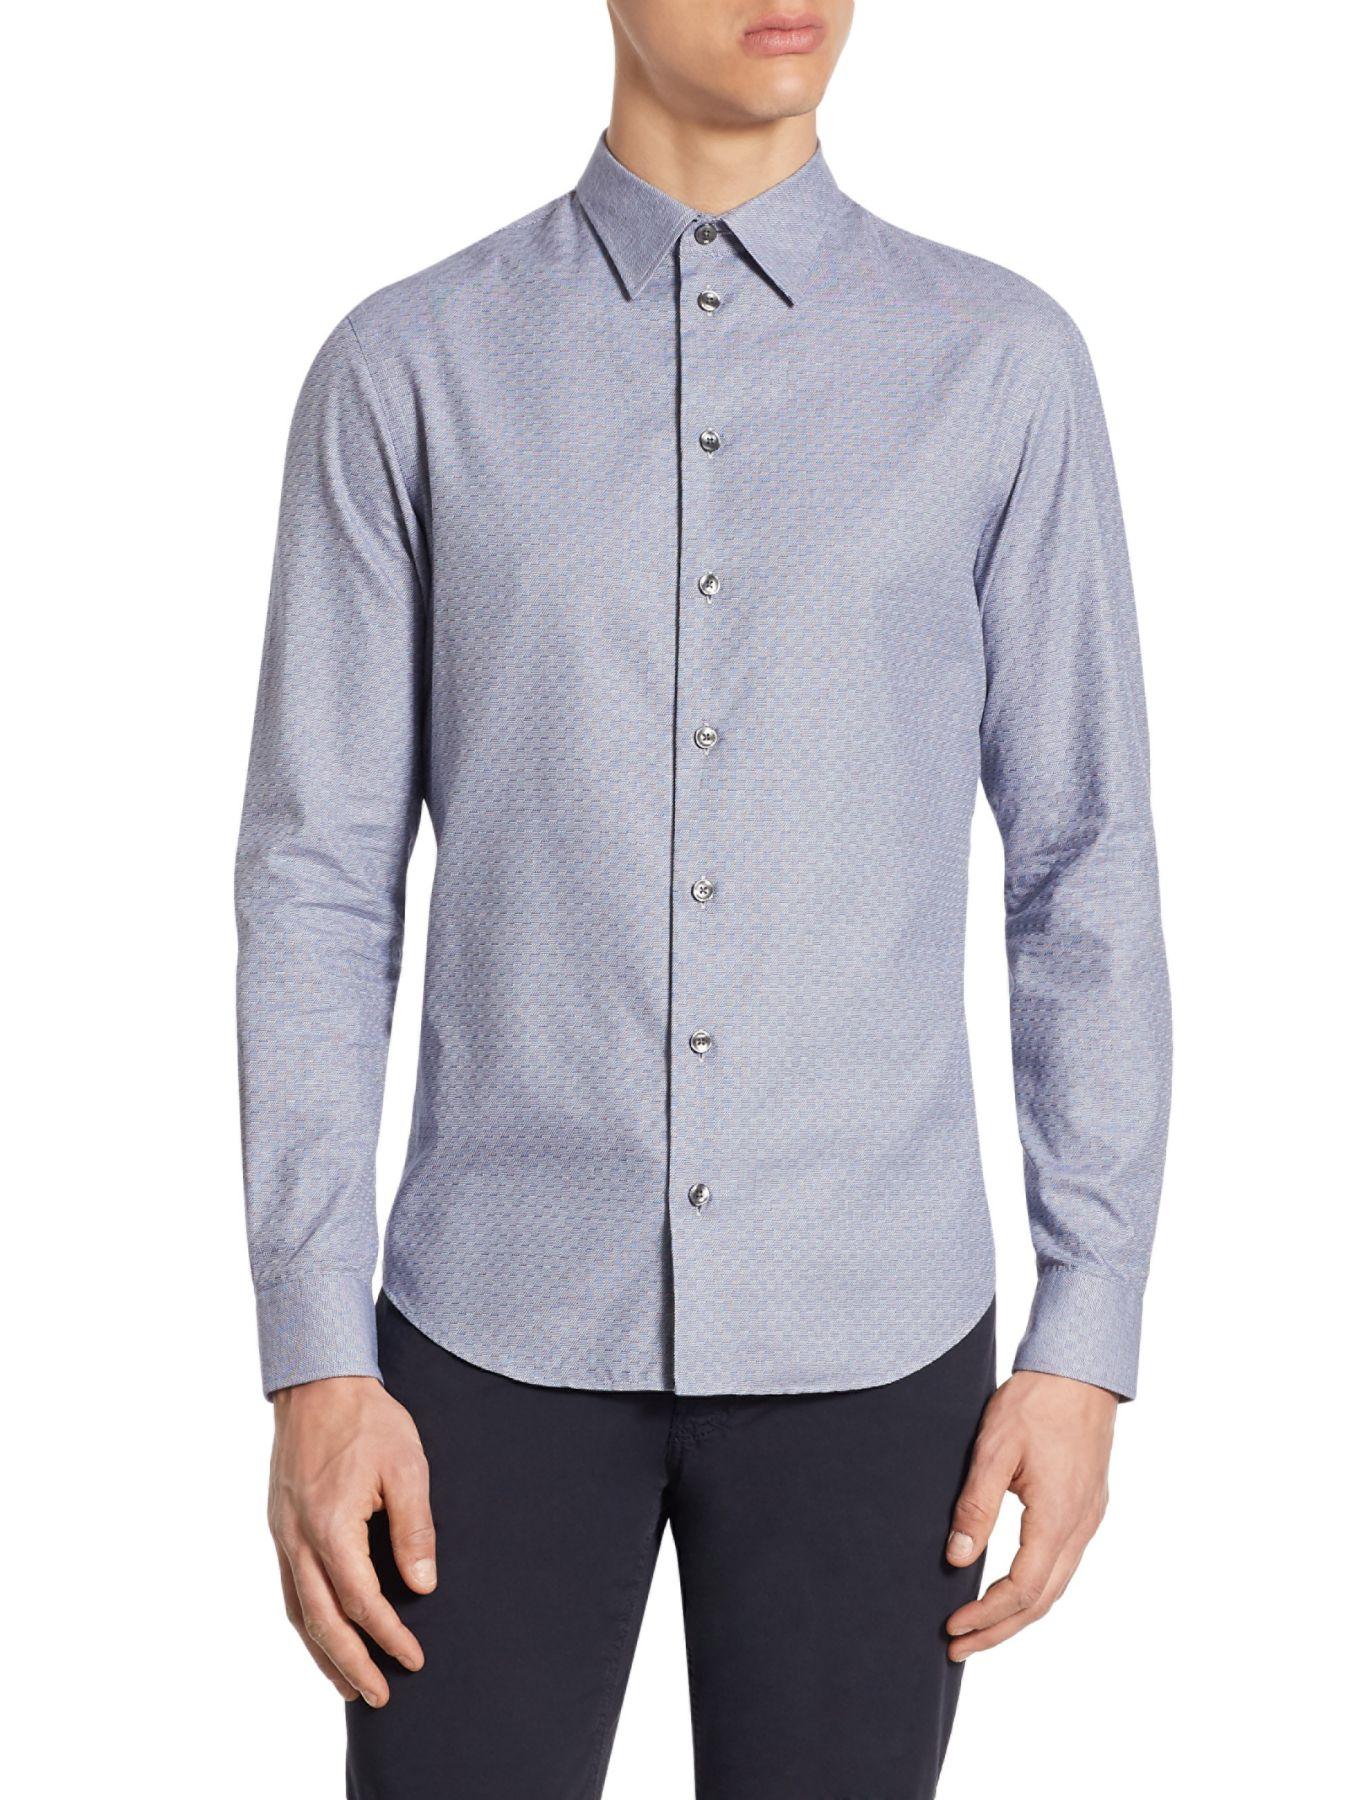 Armani Cotton Slim-fit Textured Dress Shirt in Blue for Men - Lyst